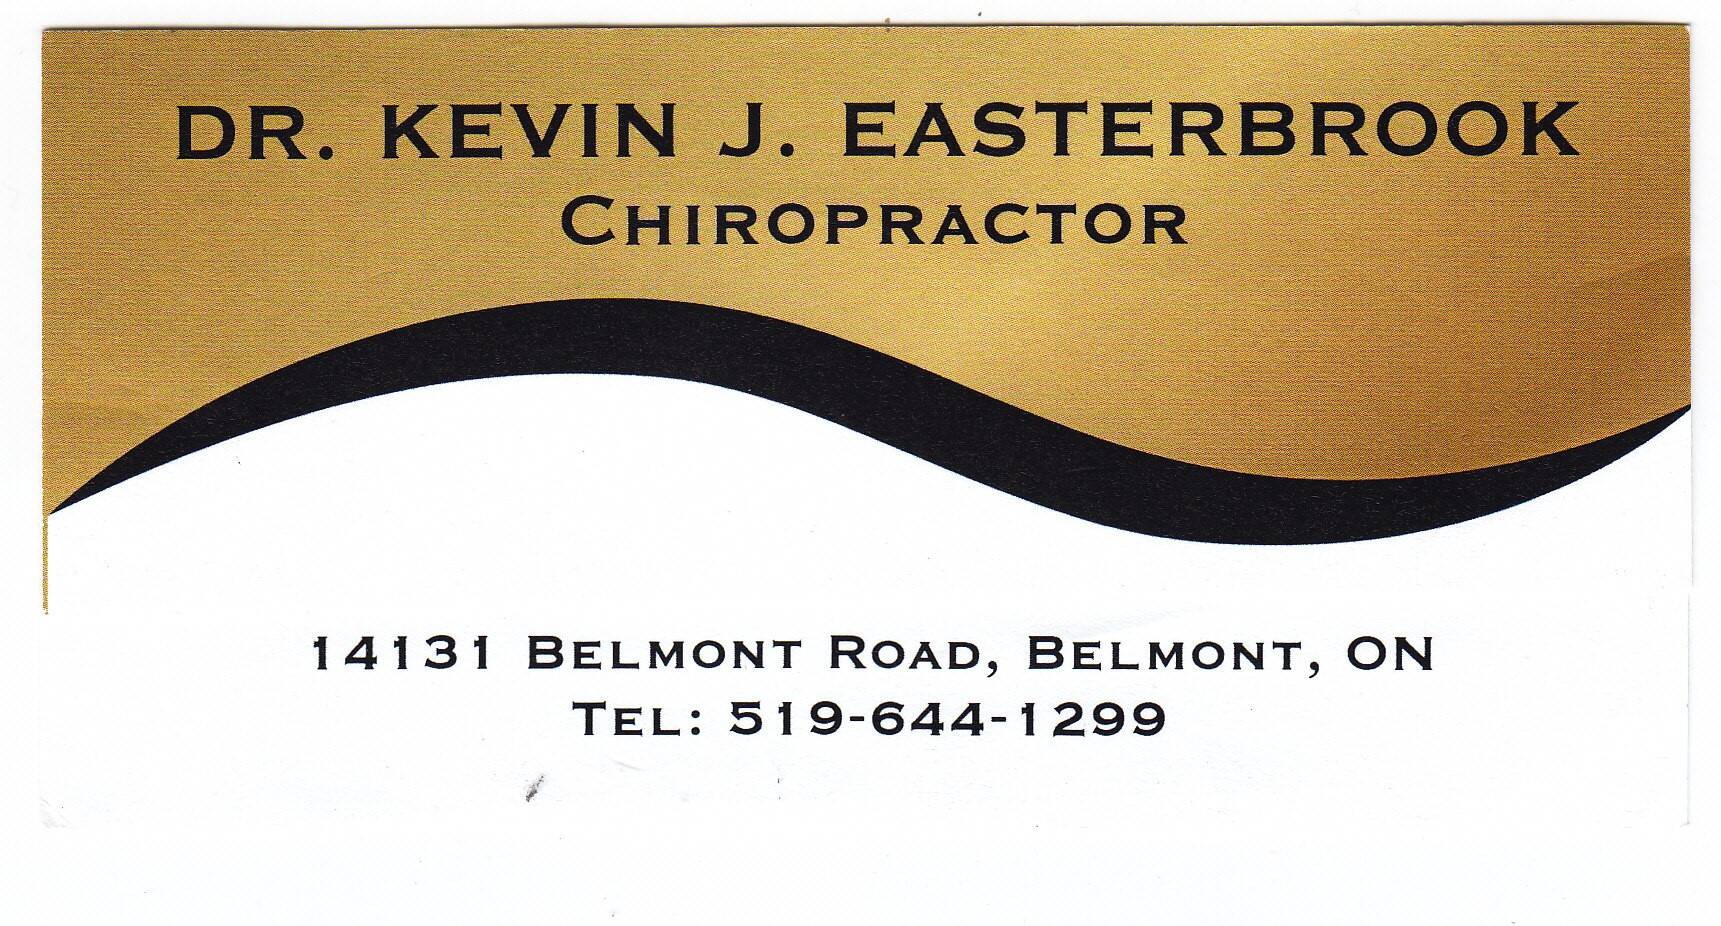 Dr. Kevin J Easterbrook Chiropractor